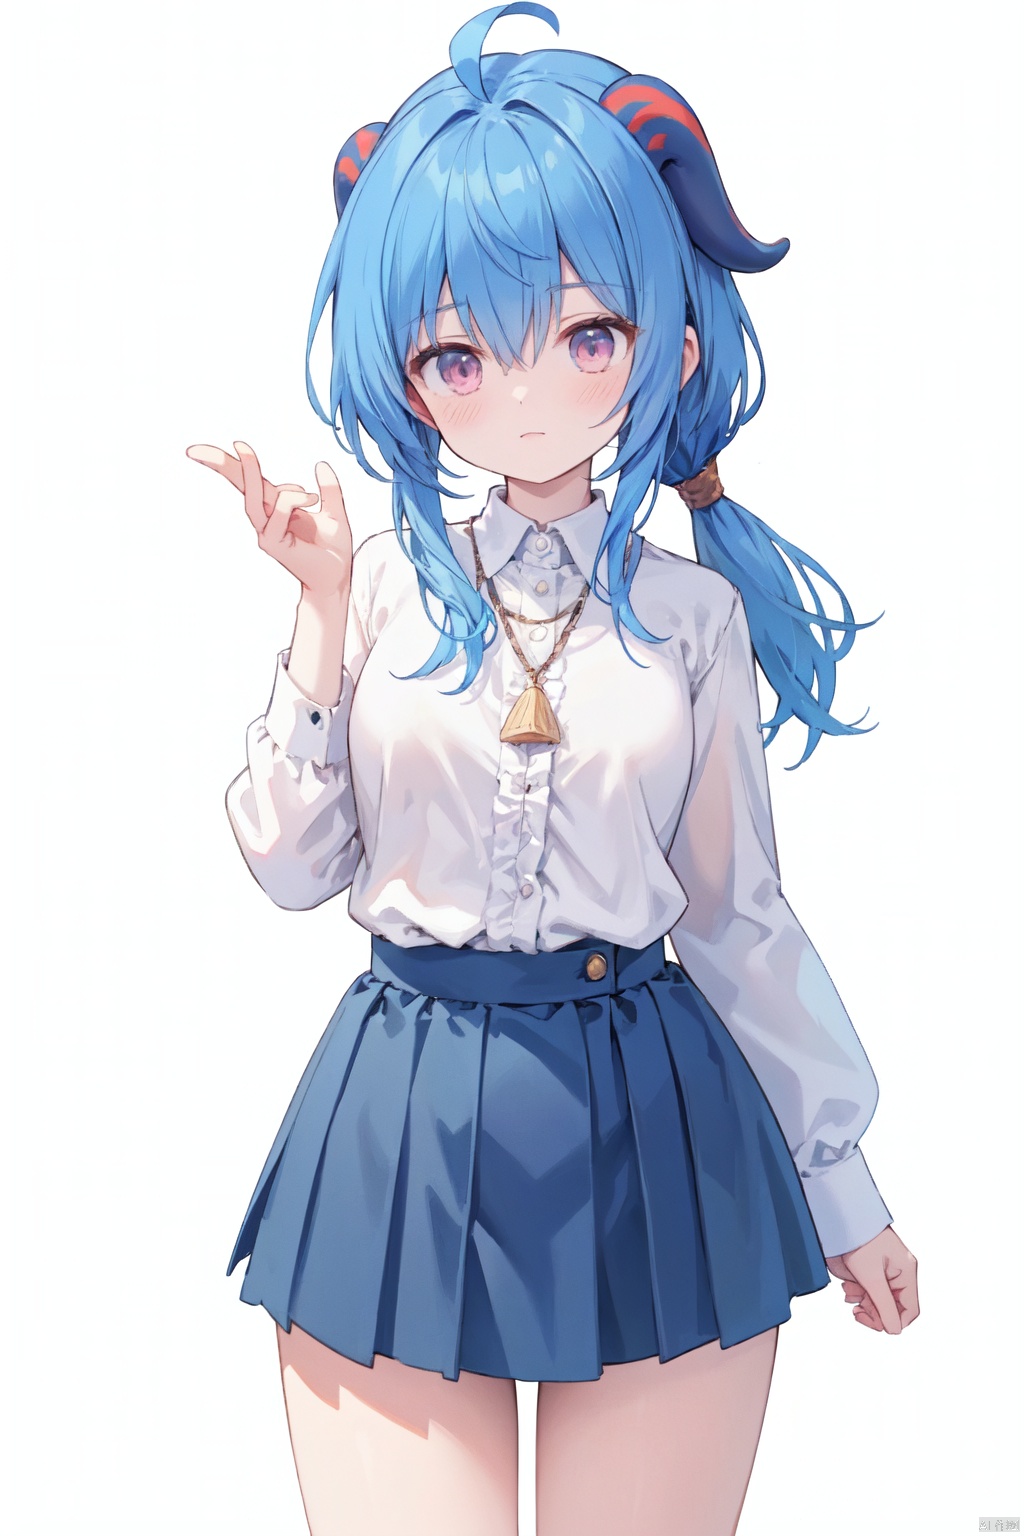  horns,(collared shirt),(low ponytail),1girl, solo,(long hair),white and blue hair,pink eyes,Hair tip,cowboy_shot,thigh,(frilled shirt:1.1),blue skirt,(thigh),bare thigh,medium_breasts,Neck,flower,dress,architecture,grass,sunny,ganyu,ahoge,hand up,cute tiny  hyperrealistic white tiger with different color eyes waring a necklace, Chibi, adorable and fluffy, logo design, cartoon, cinematic lighting effect, charming, 3D vector art, cute and quirky, fantasy art, bokeh, hand-drawn, digital painting, soft lighting, isometric style, 4K resolution, photorealistic rendering, highly detailed clean, vector image, photorealistic masterpiece, professional photography, simple space backdrop, flat white background, isometric, vibrant vector